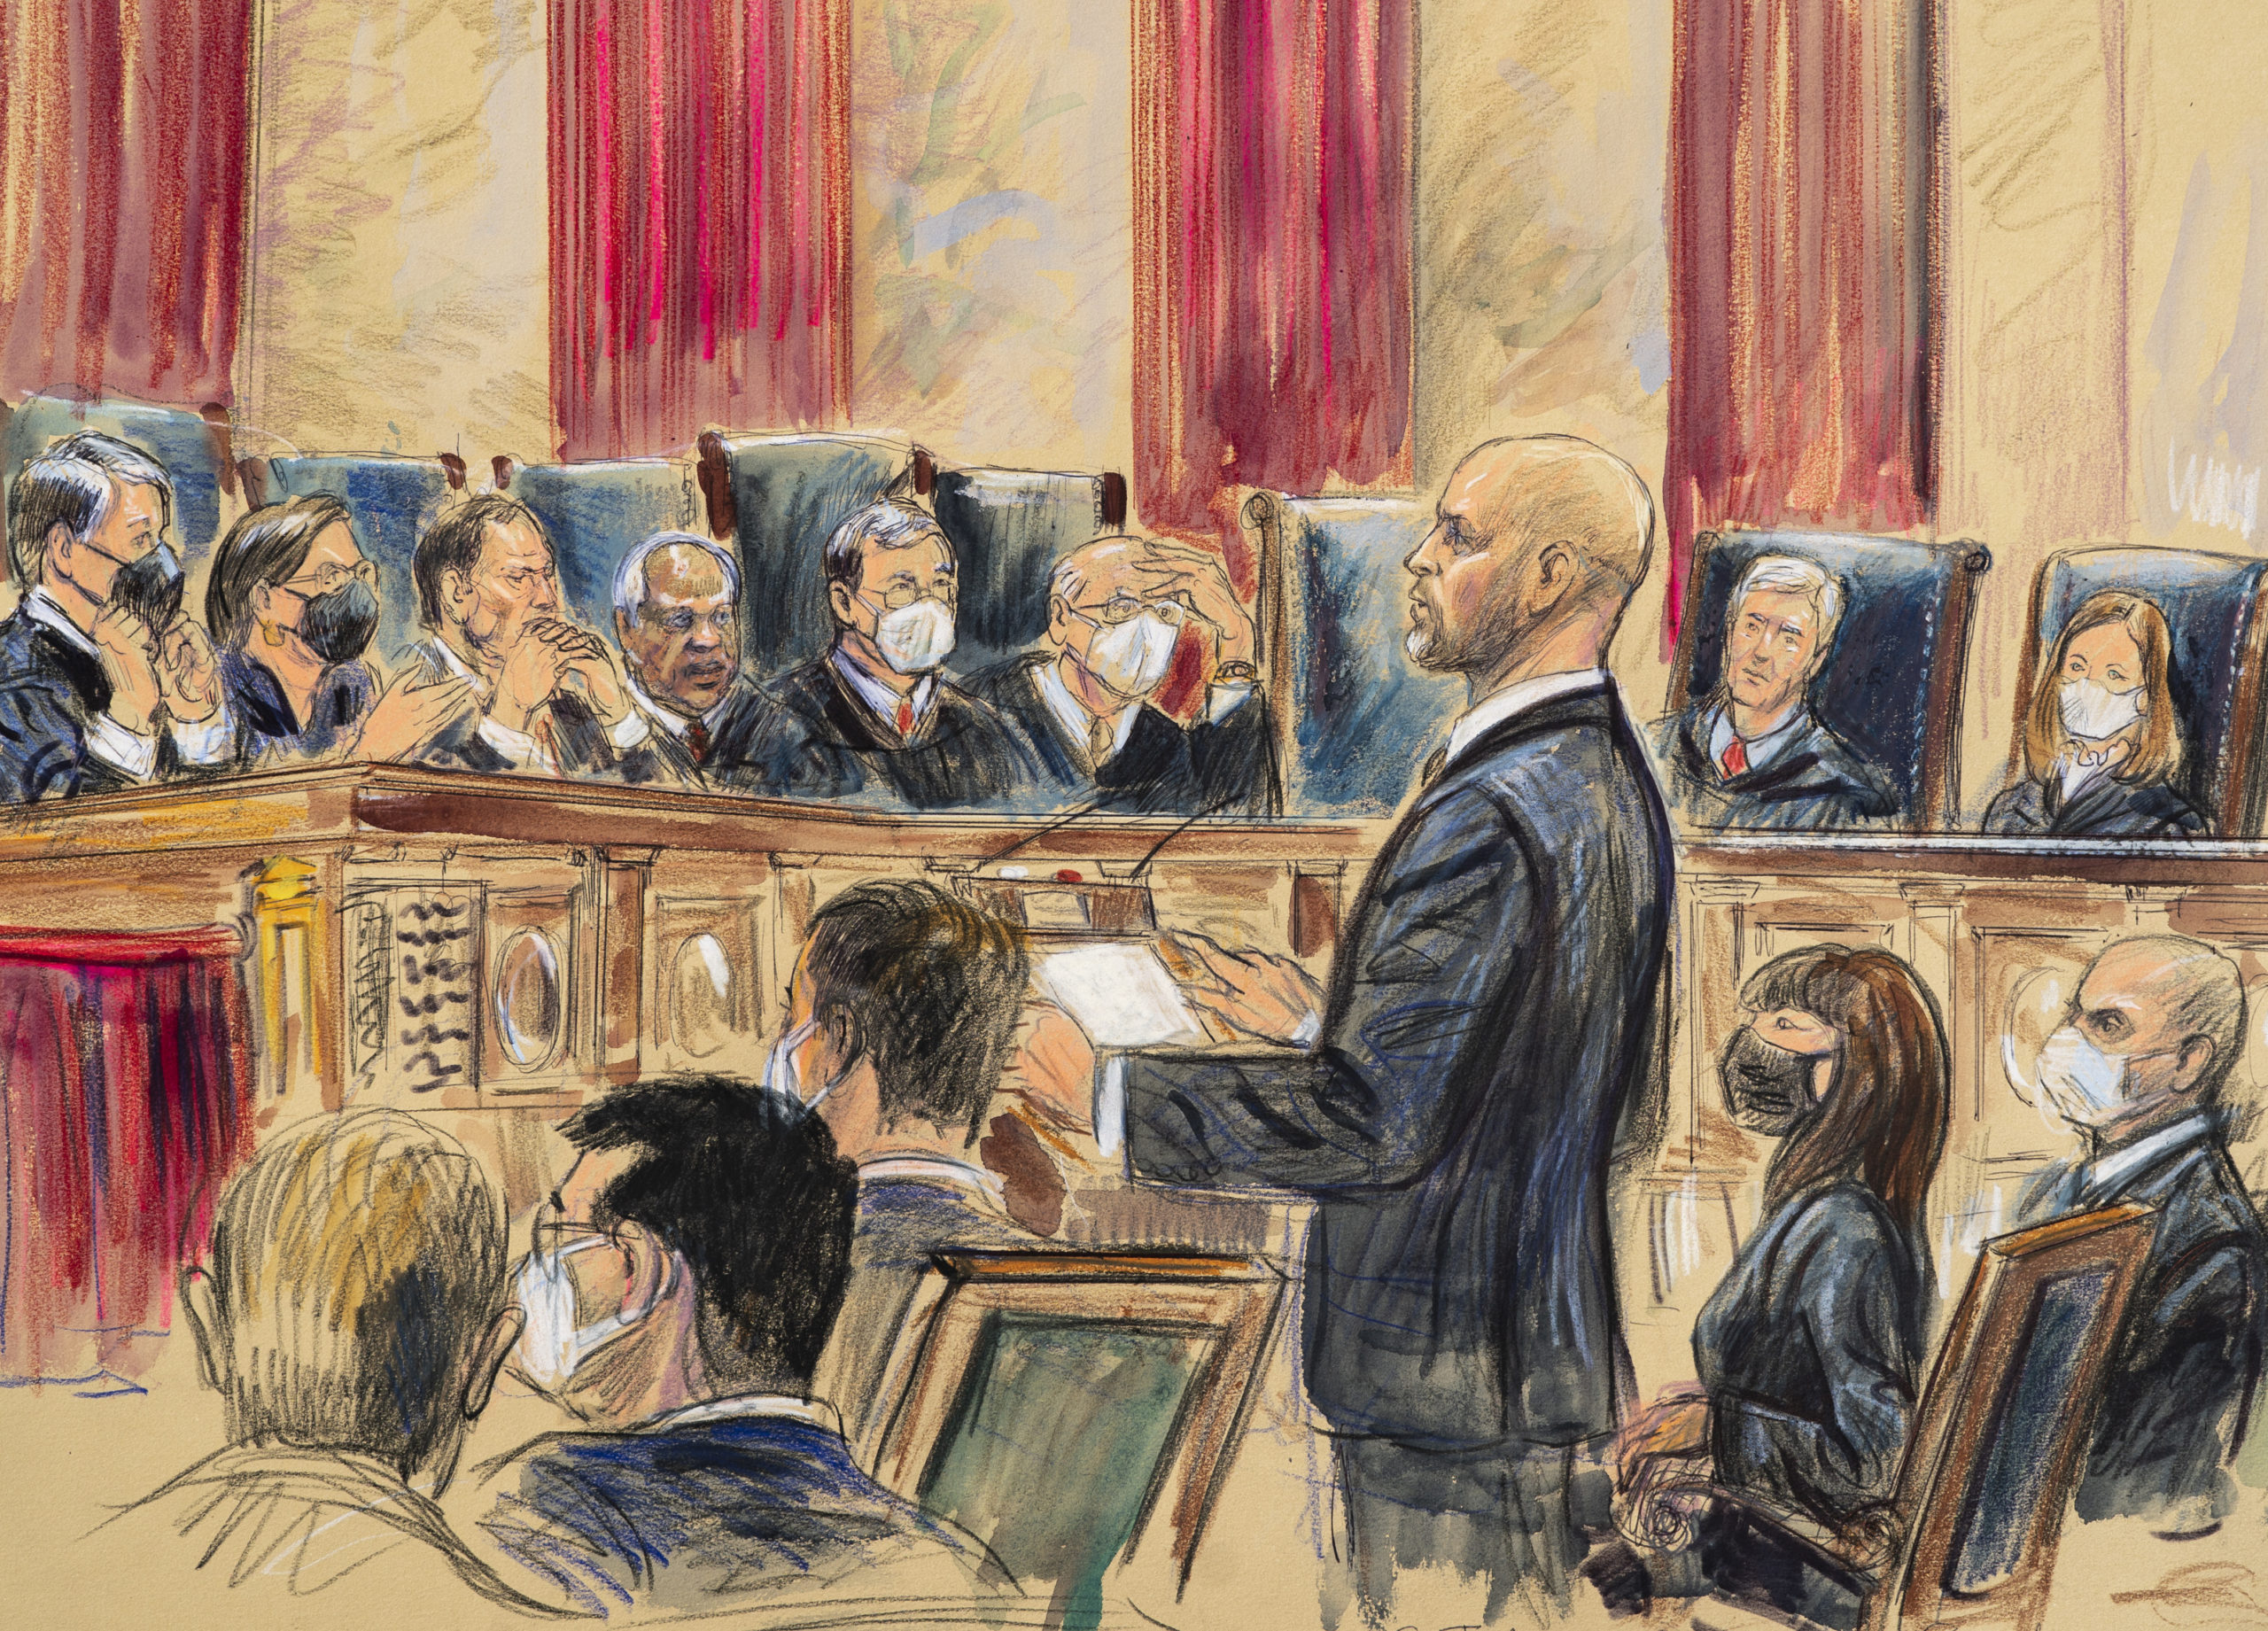 An artist's sketch depicts lawyer Scott Keller standing to argue on behalf of more than two dozen business groups opposing a Biden administration vaccine-or-testing mandate before the Supreme Court in Washington, D.C., on Jan. 7. The court has stopped the Biden administration from enforcing a requirement that employees at large businesses be vaccinated against COVID-19 or undergo weekly testing and wear a mask on the job.